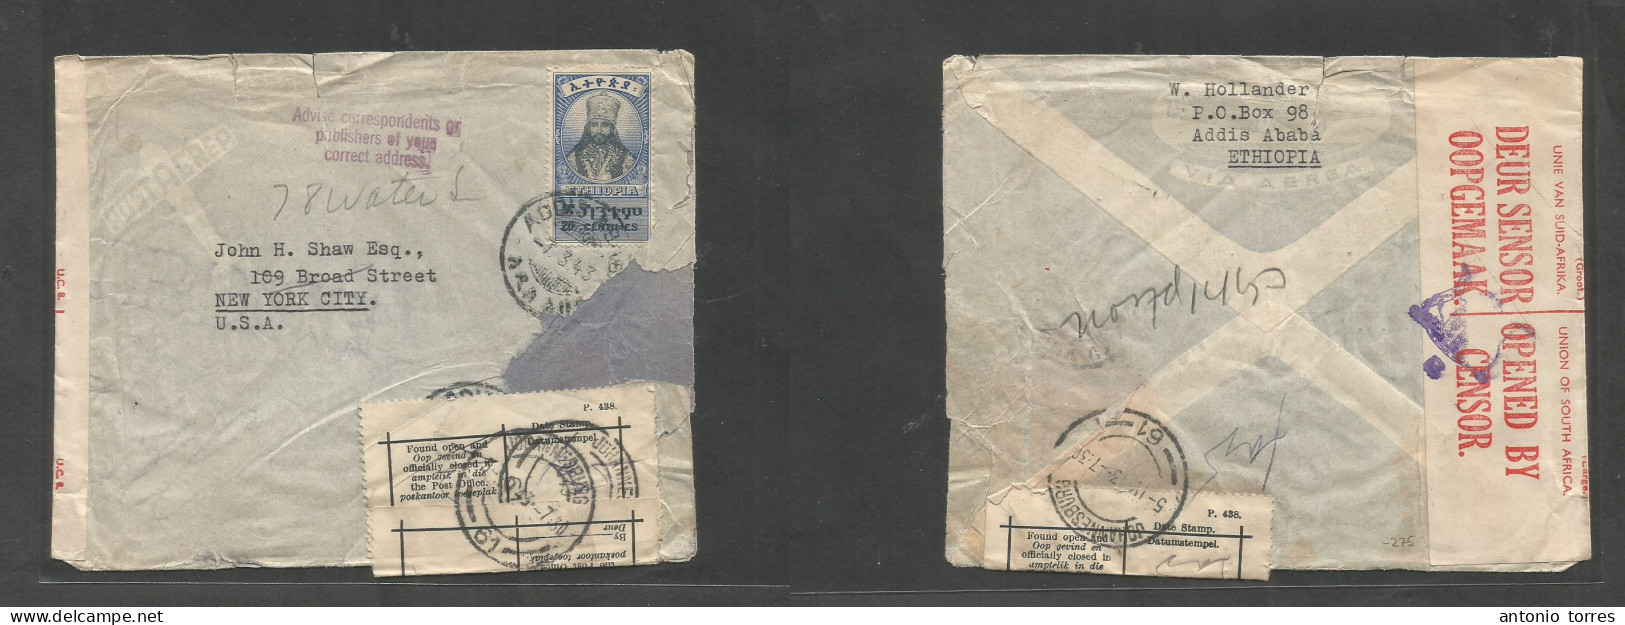 Ethiopia. 1943 (7 March) Addis Abeba - USA, NYC. Fkd Env 20c Rate + S. Africa Censor + Post Office Official Label Tied A - Ethiopie